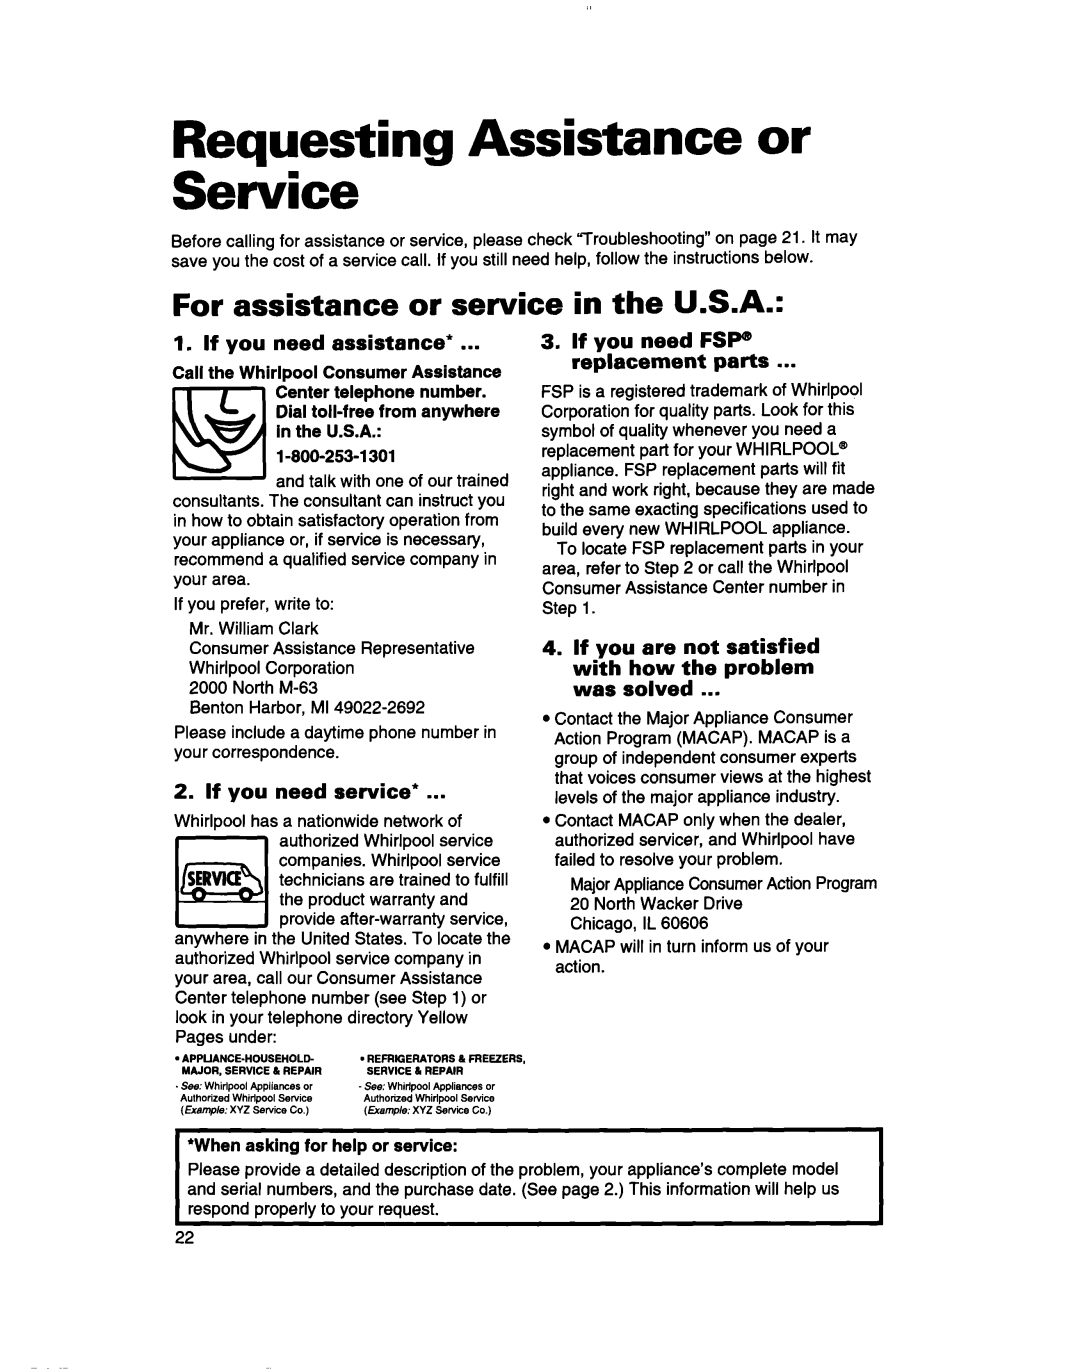 Whirlpool TT14DKXBN11 warranty Service, For assistance or service in the U.S.A 